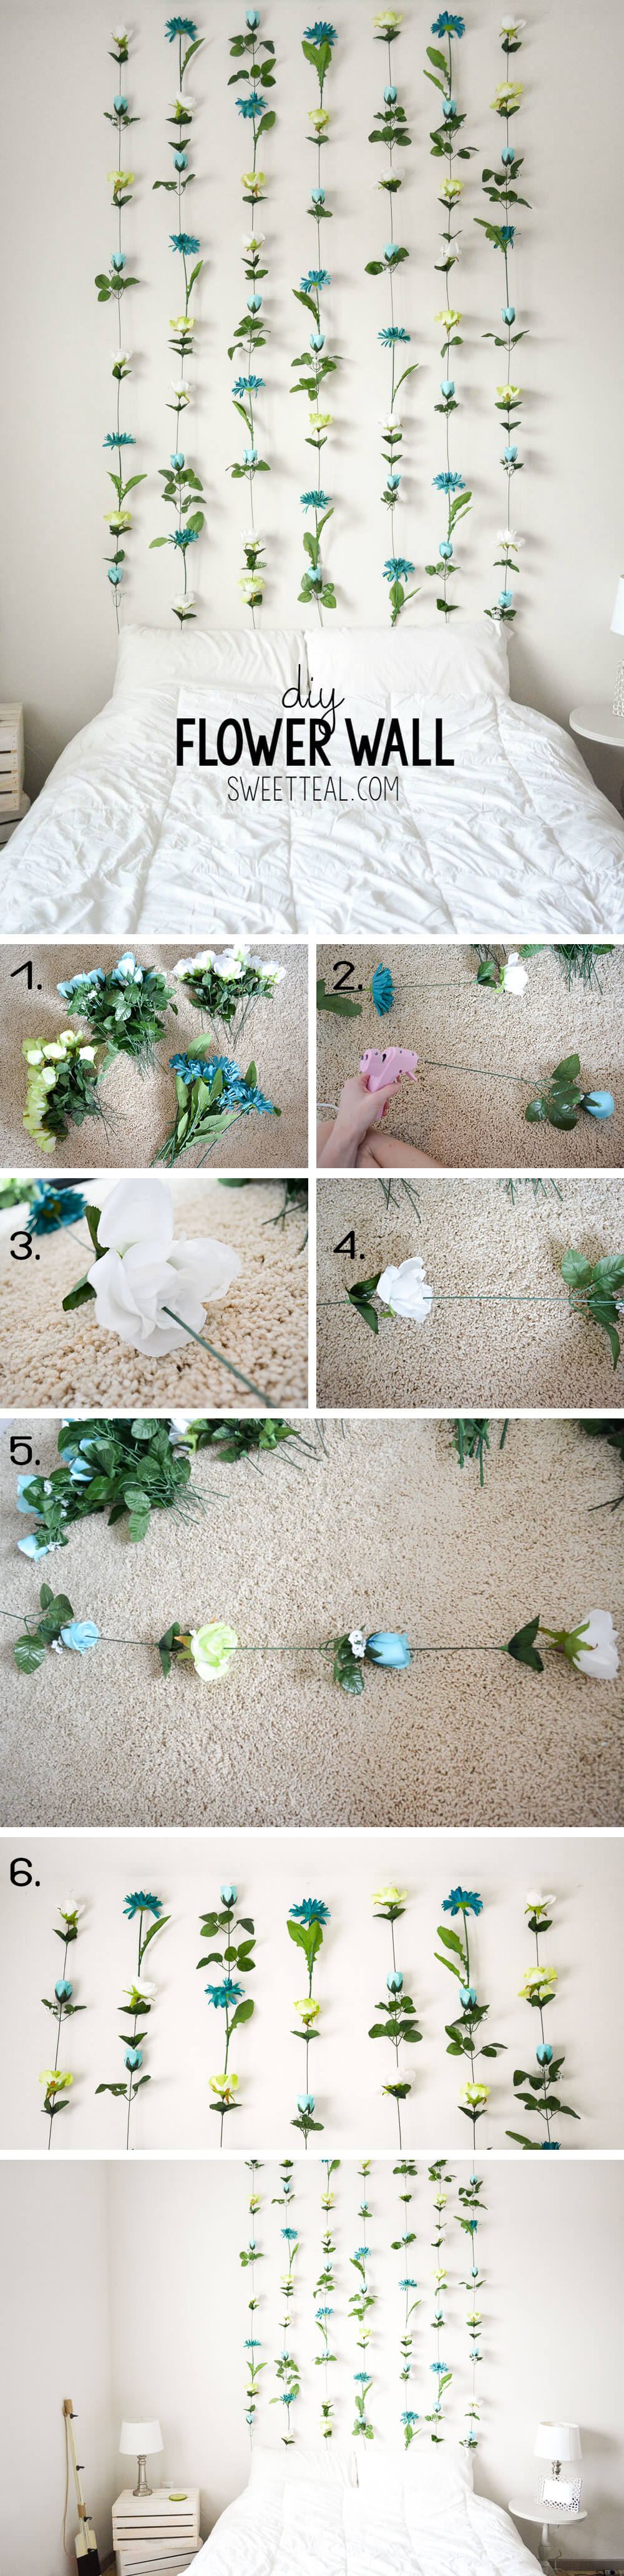 Gorgeous DIY Flower Wall Bedroom Project Ideas